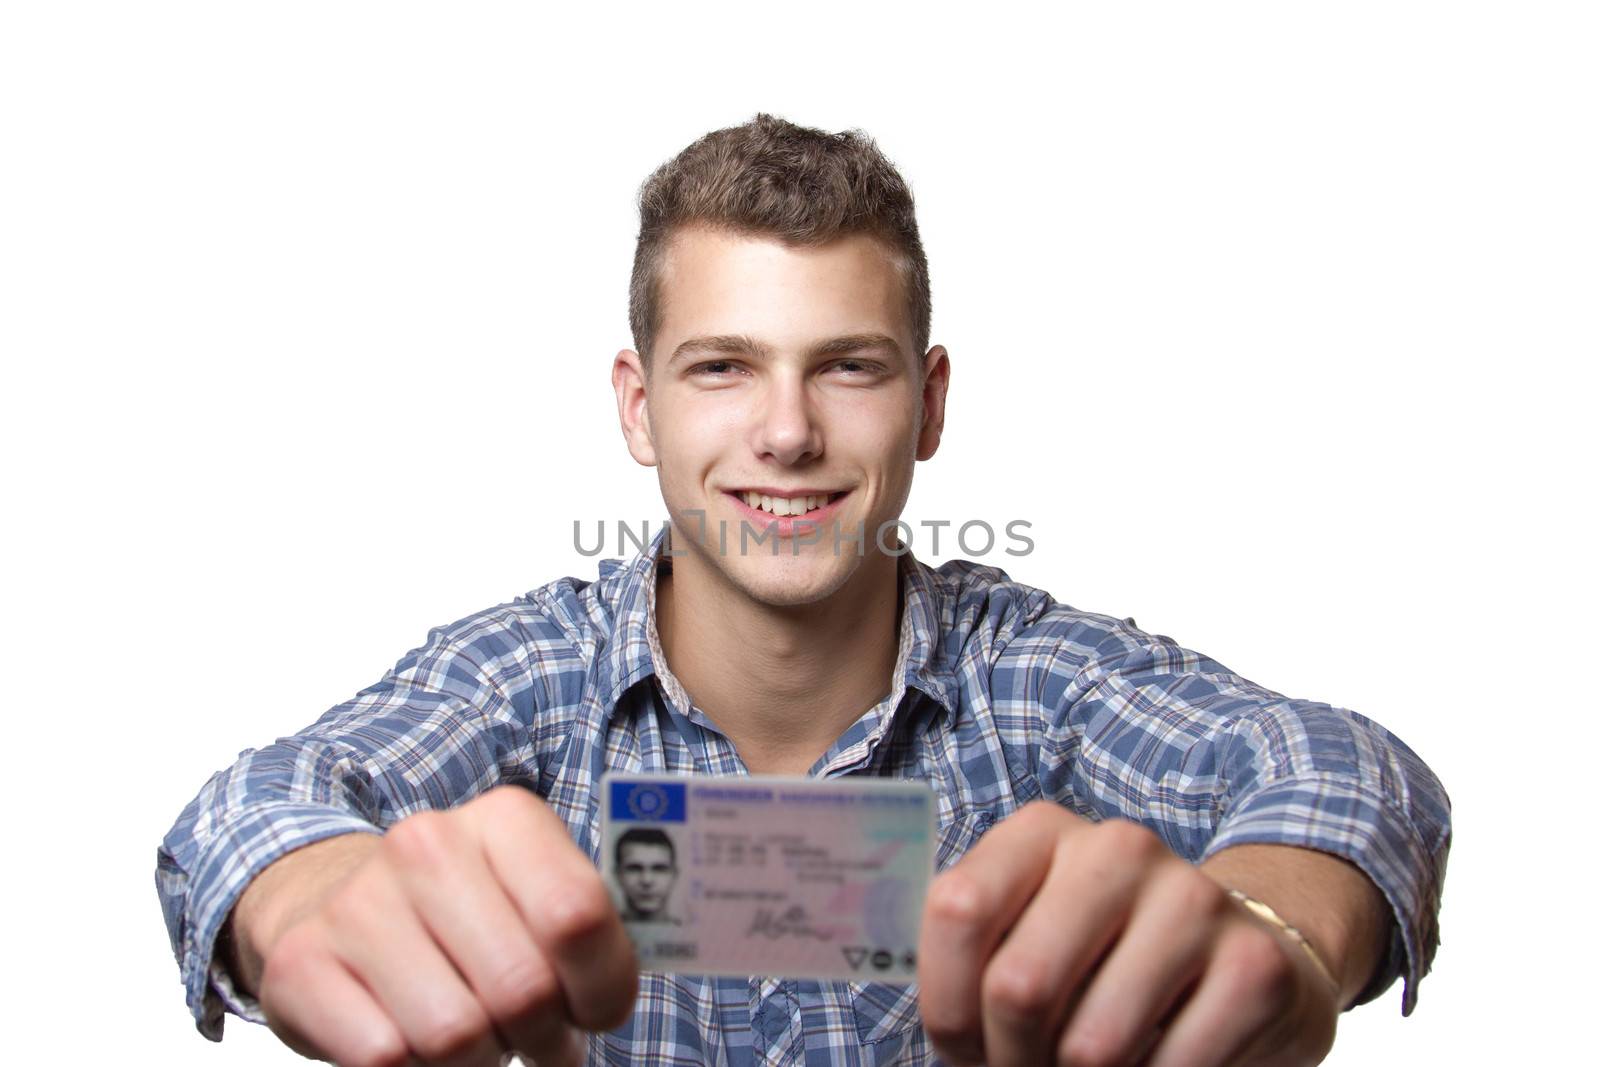 Young man just recieved his drivers license and is happy to drive his own car soon